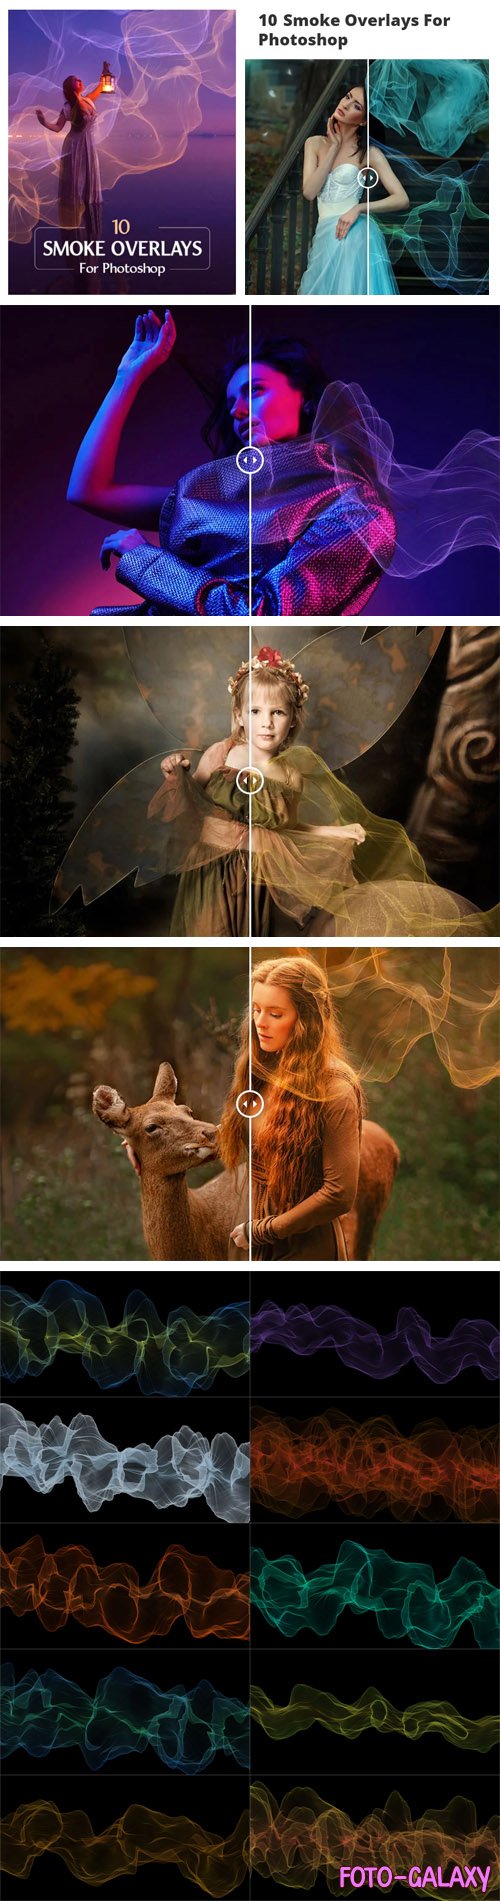 10 Smoke Overlays For Photoshop - Add Extra Drama To Your Images